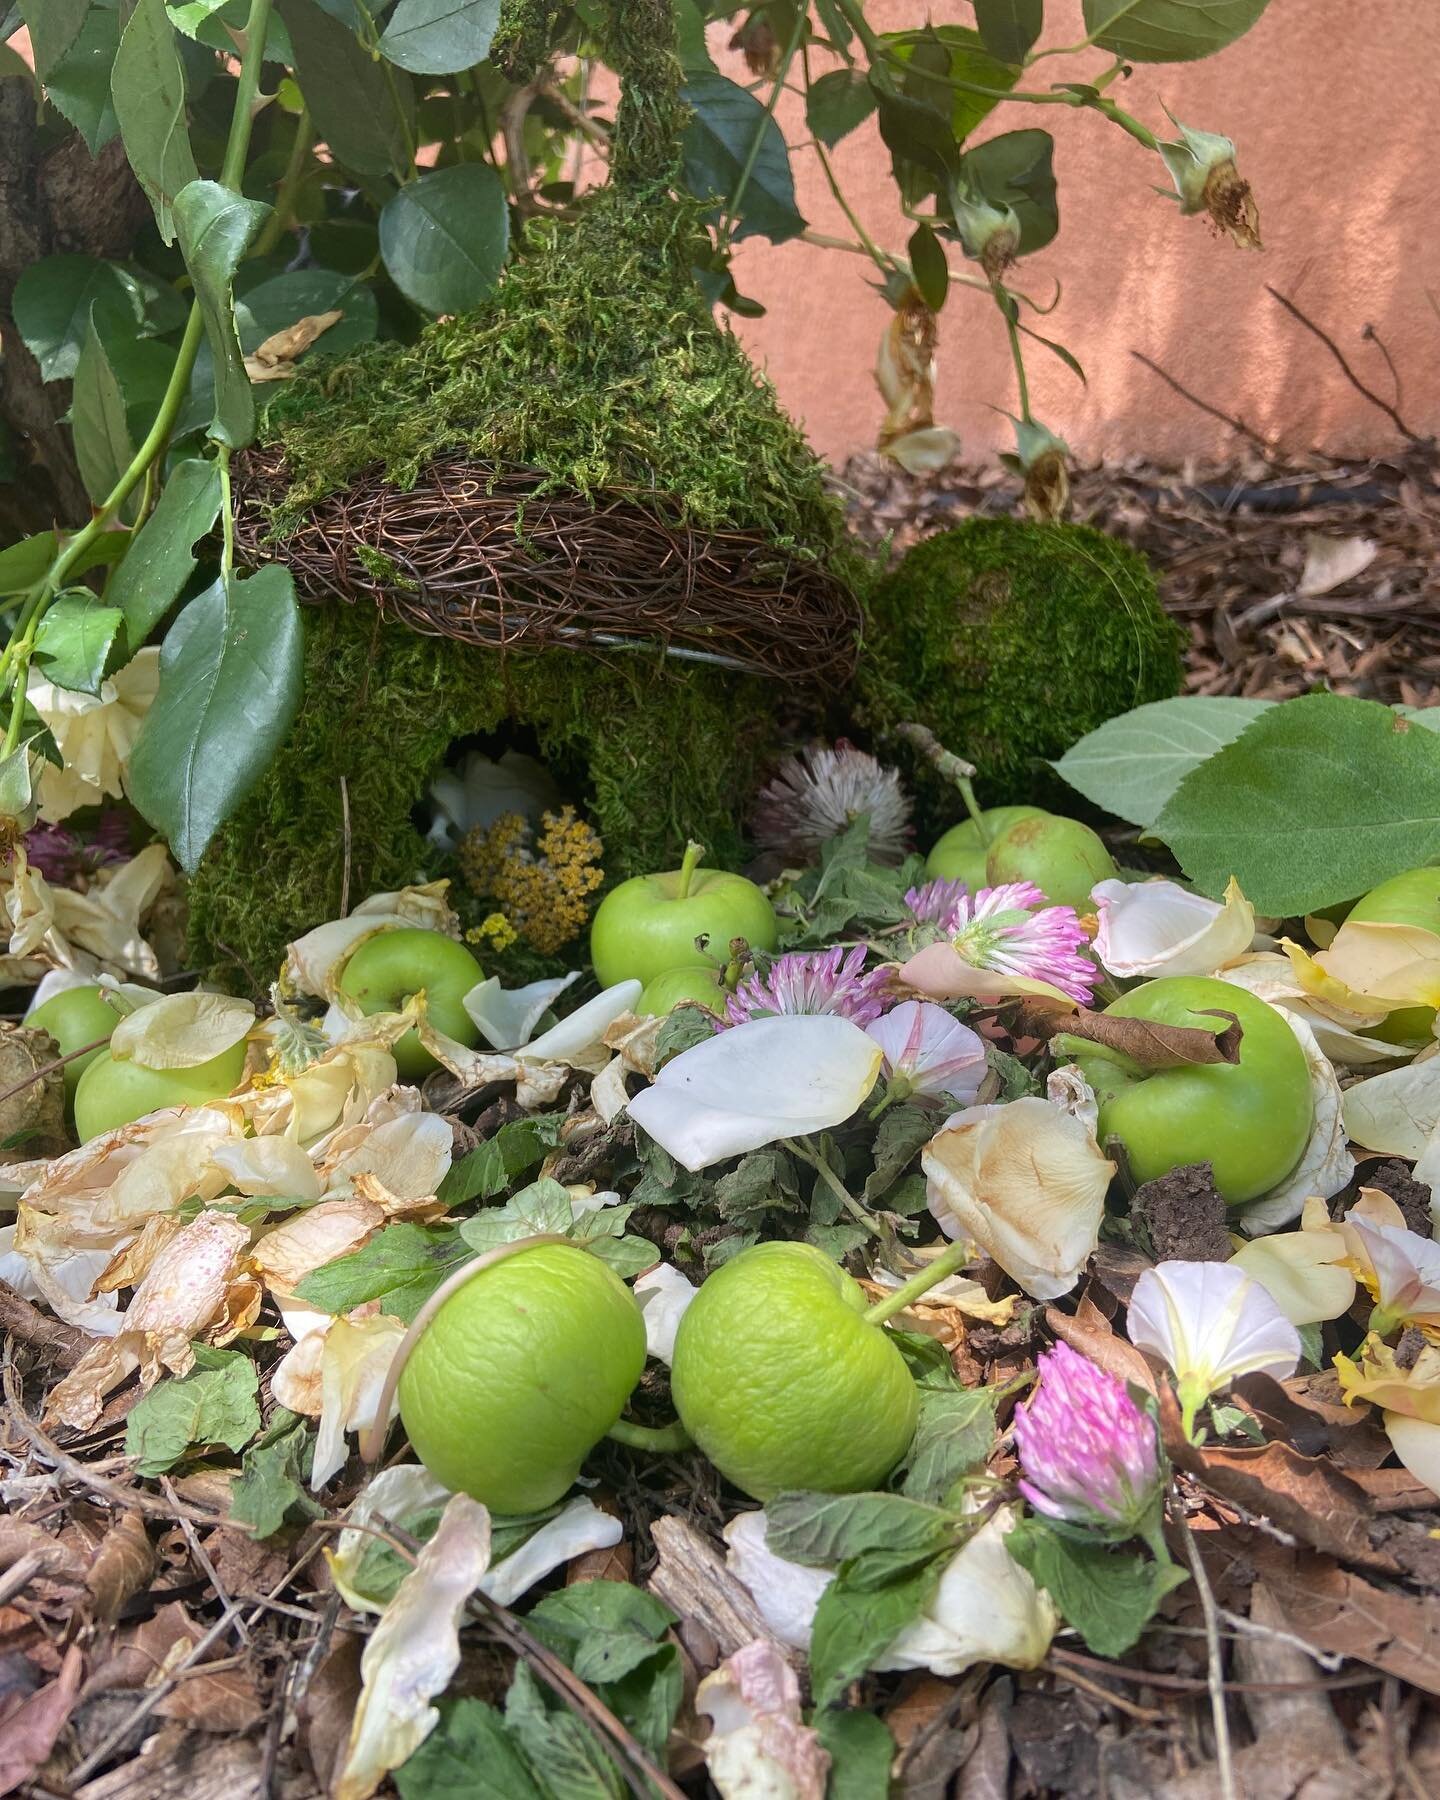 Thanks to the creativity of our summer program teachers, we now have a couple of fairy houses around our campus!

#santafewaldorfschool #summerprogram #fairyhouses